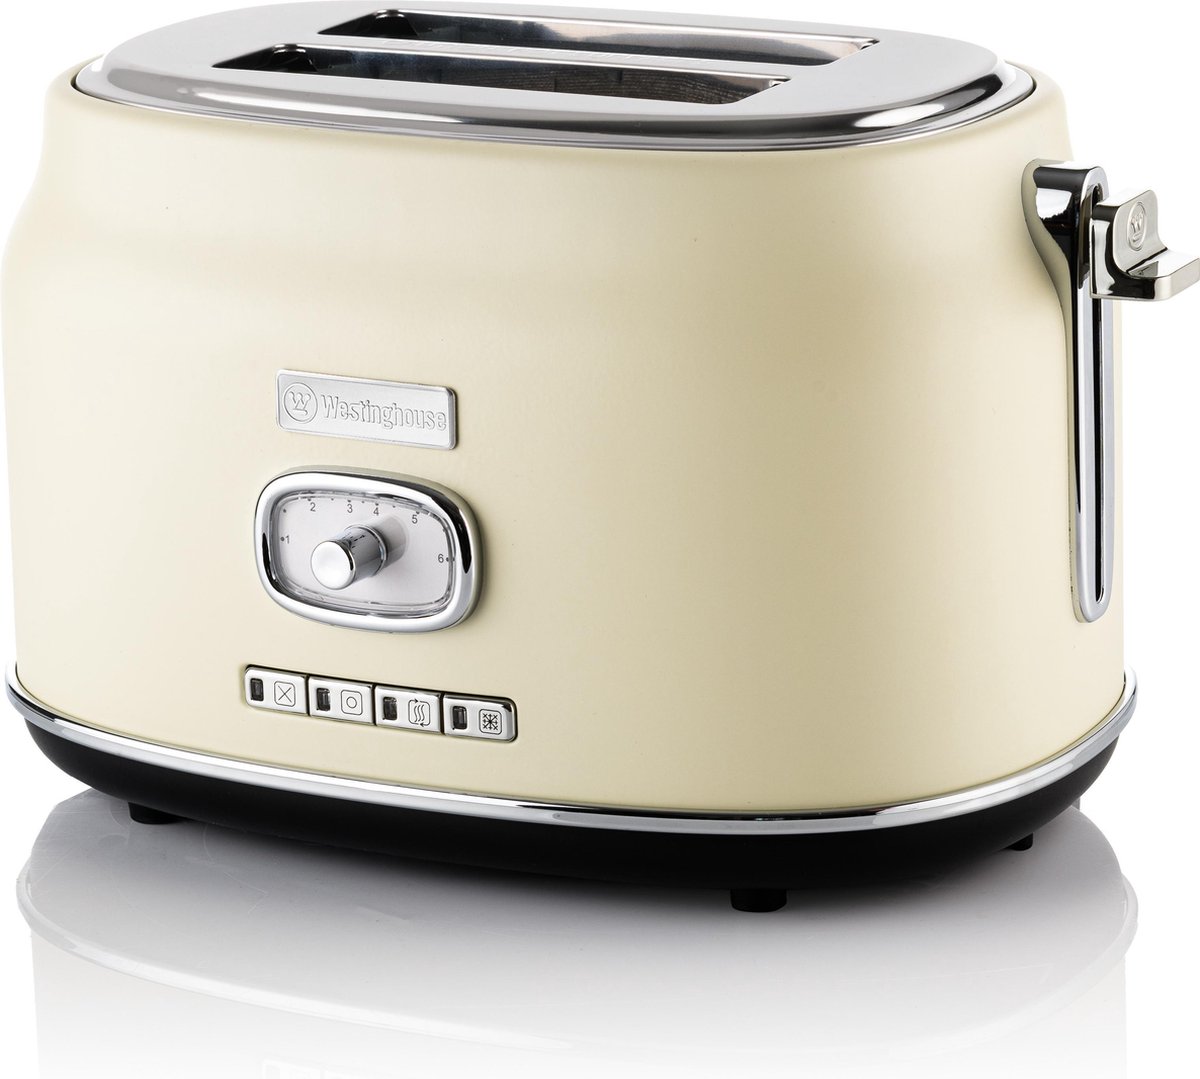 Westinghouse Retro Broodrooster - 2 Slice Toaster - - Wit